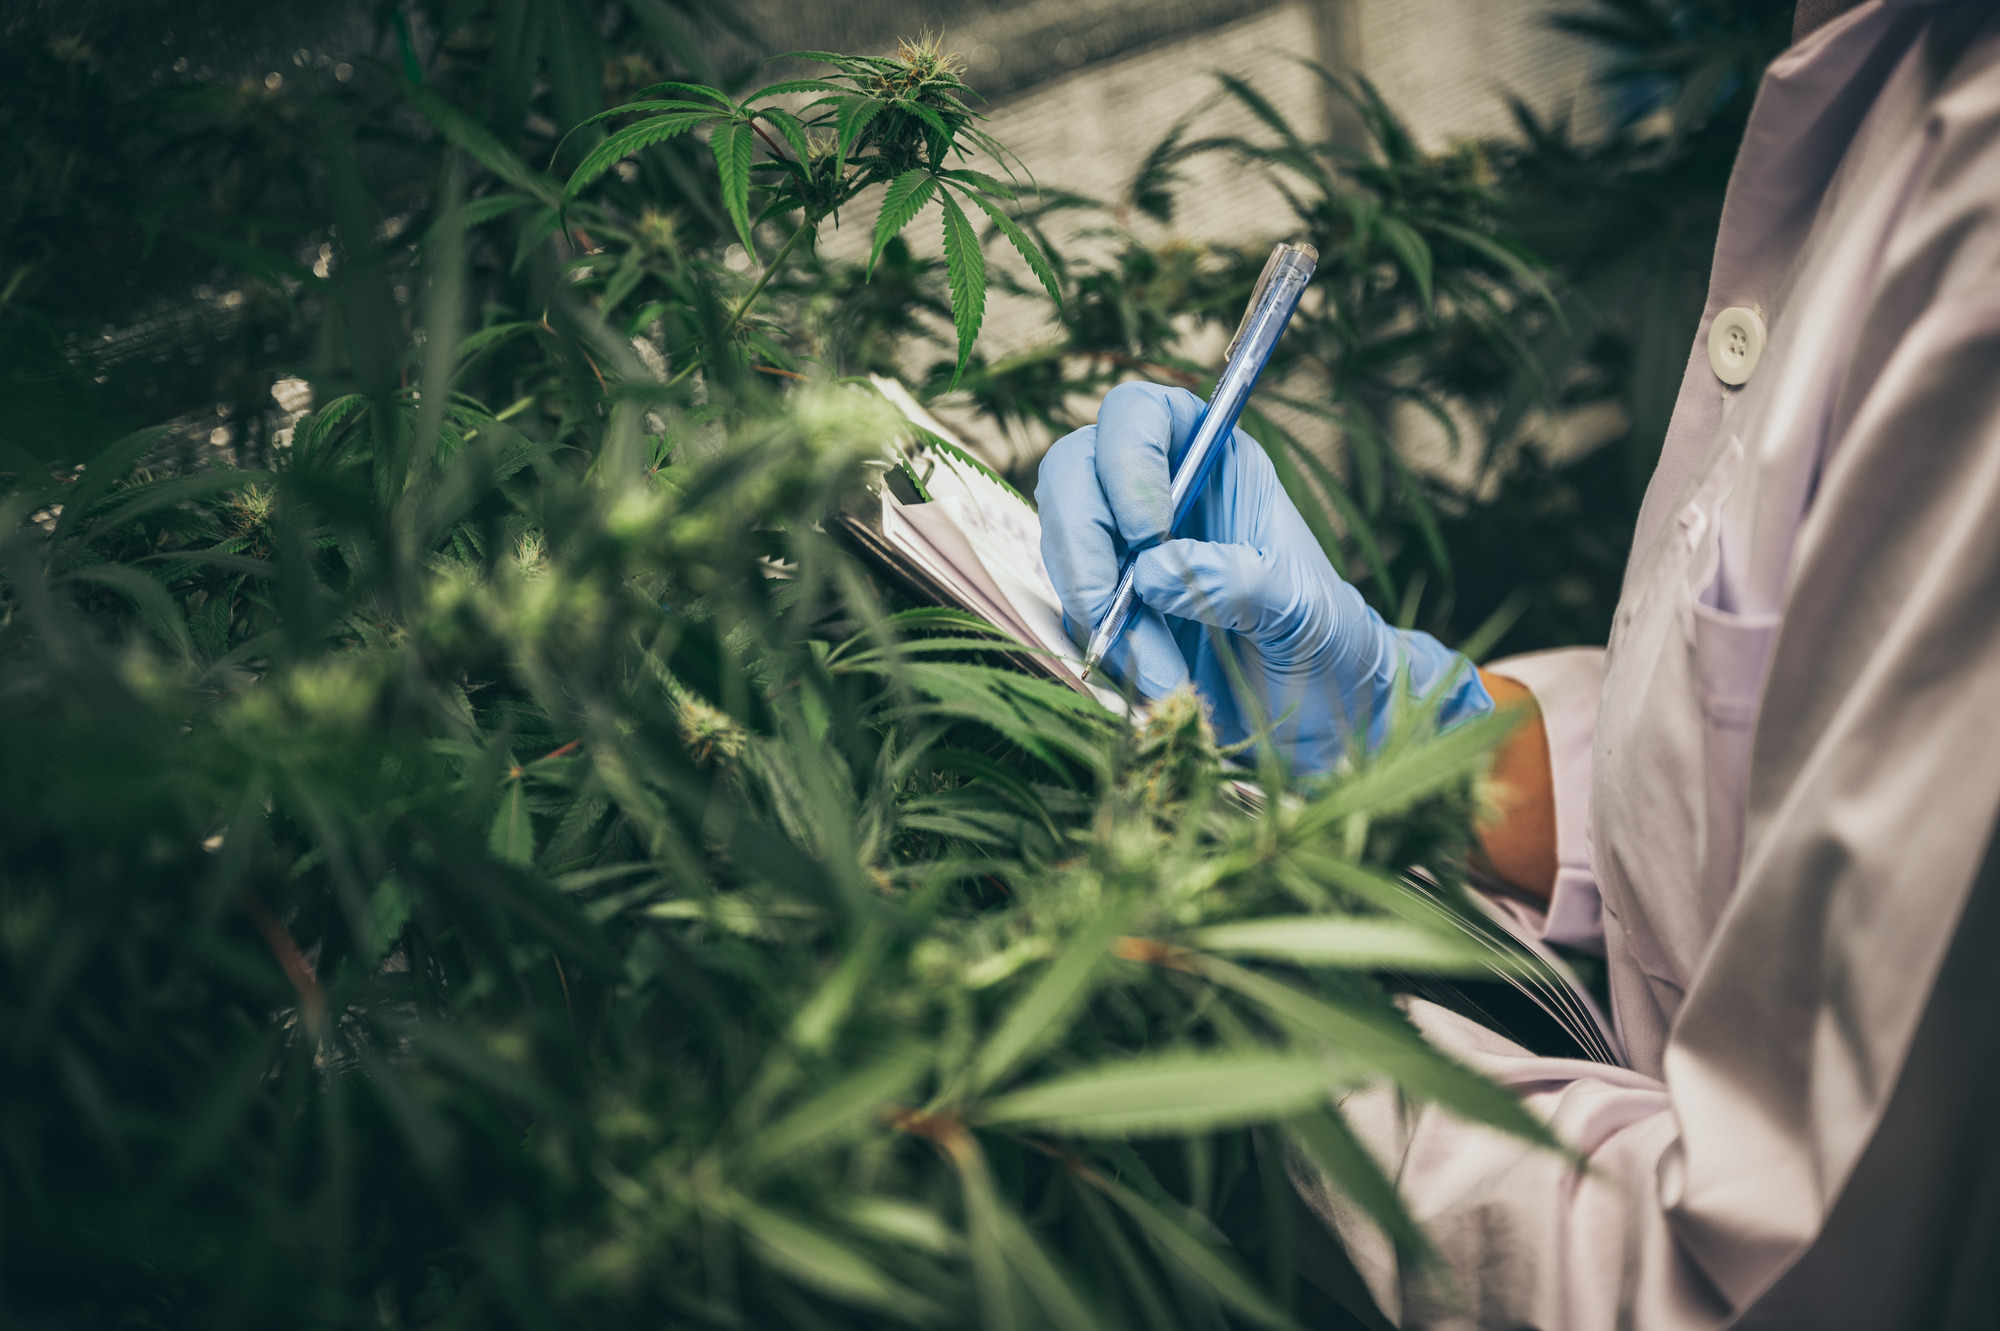 Researchers have shown the cannabis business market is one of the fastest-growing markets out there. If you’re thinking of getting into this successful field, give us a call and let our cannabis business consultants help you!